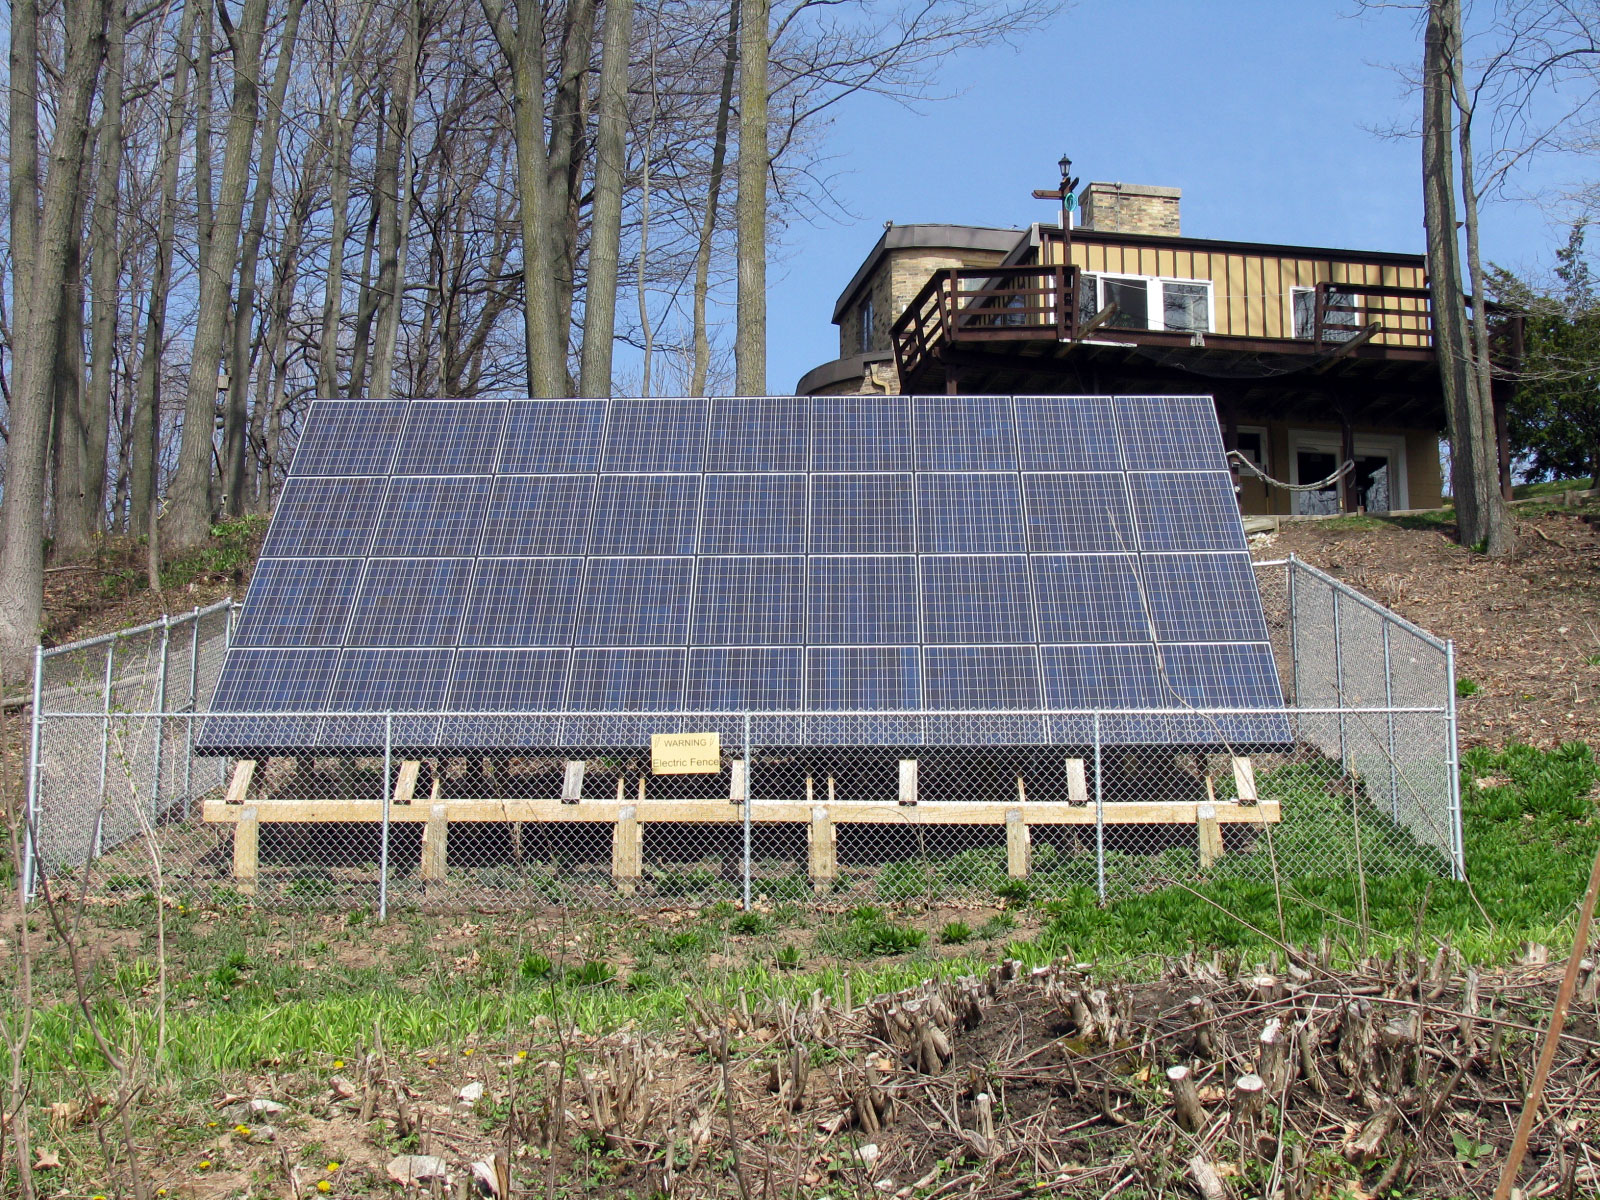 A solar panel setup in a resident's yard